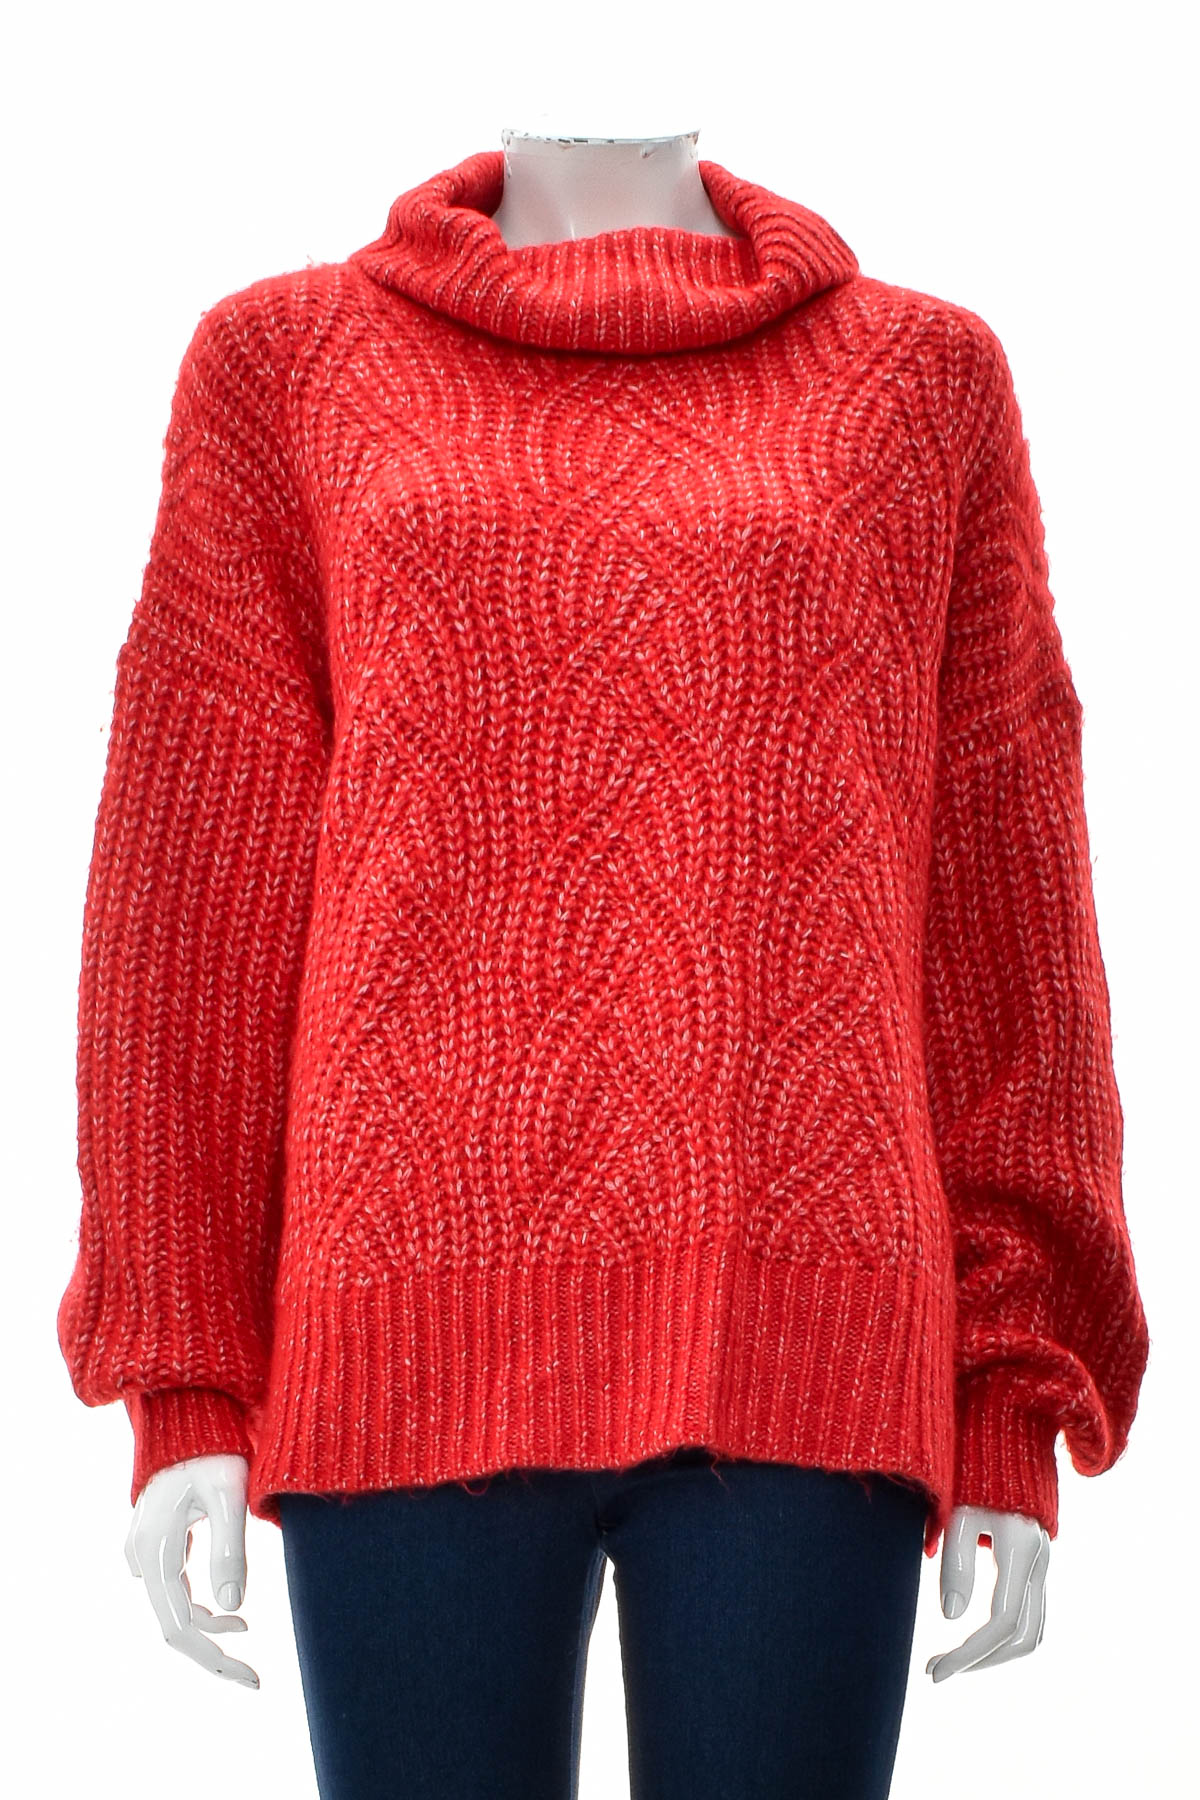 Women's sweater - A.new.day - 0